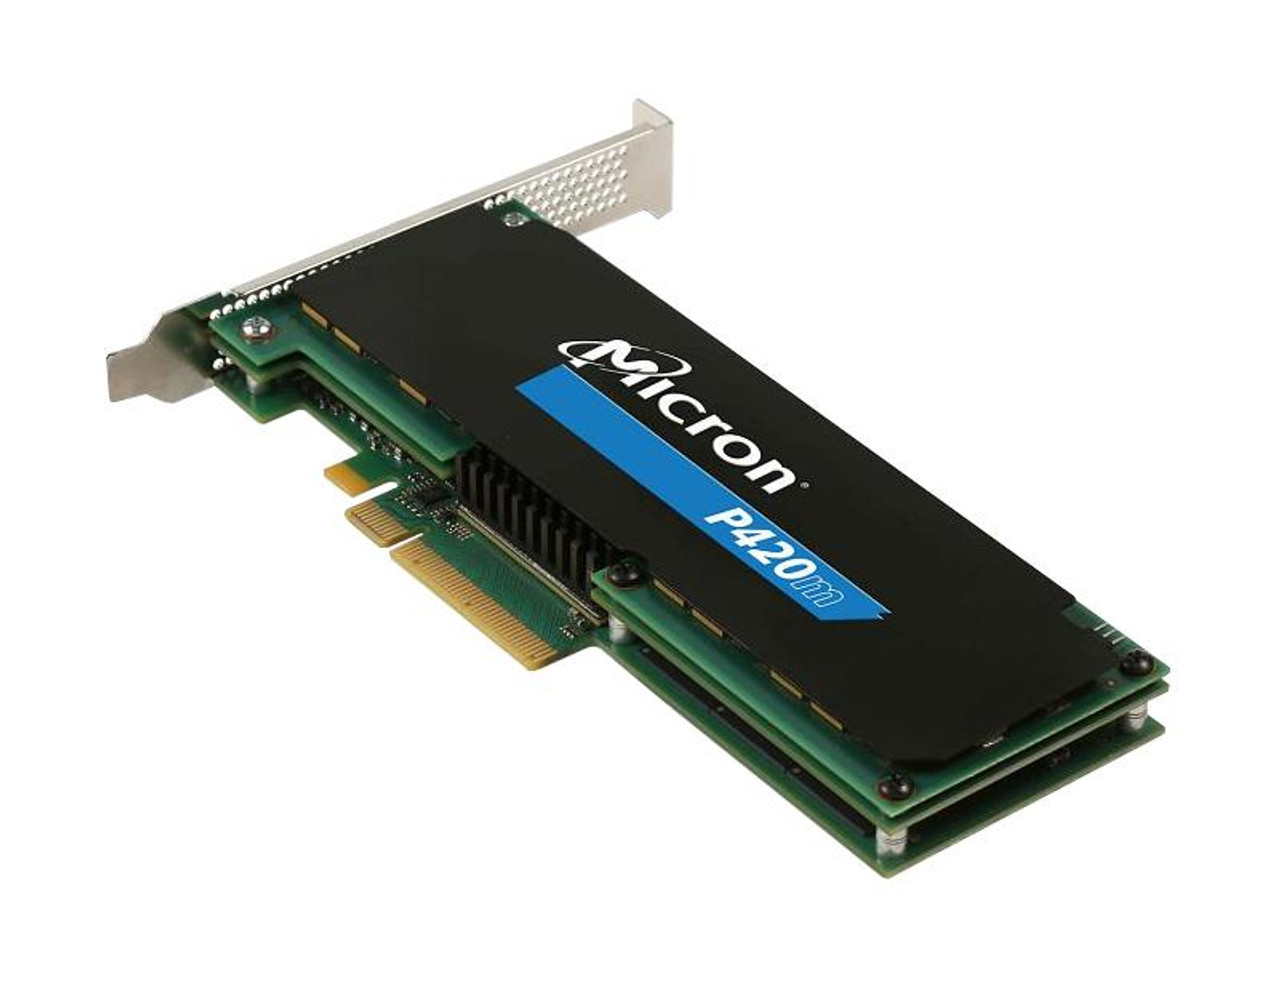 MTFDGAR700MAX1AG13A Micron P420m 700GB MLC PCI Express 2.0 x8 (Bootable) HH-HL Add-in Card Solid State Drive (SSD)